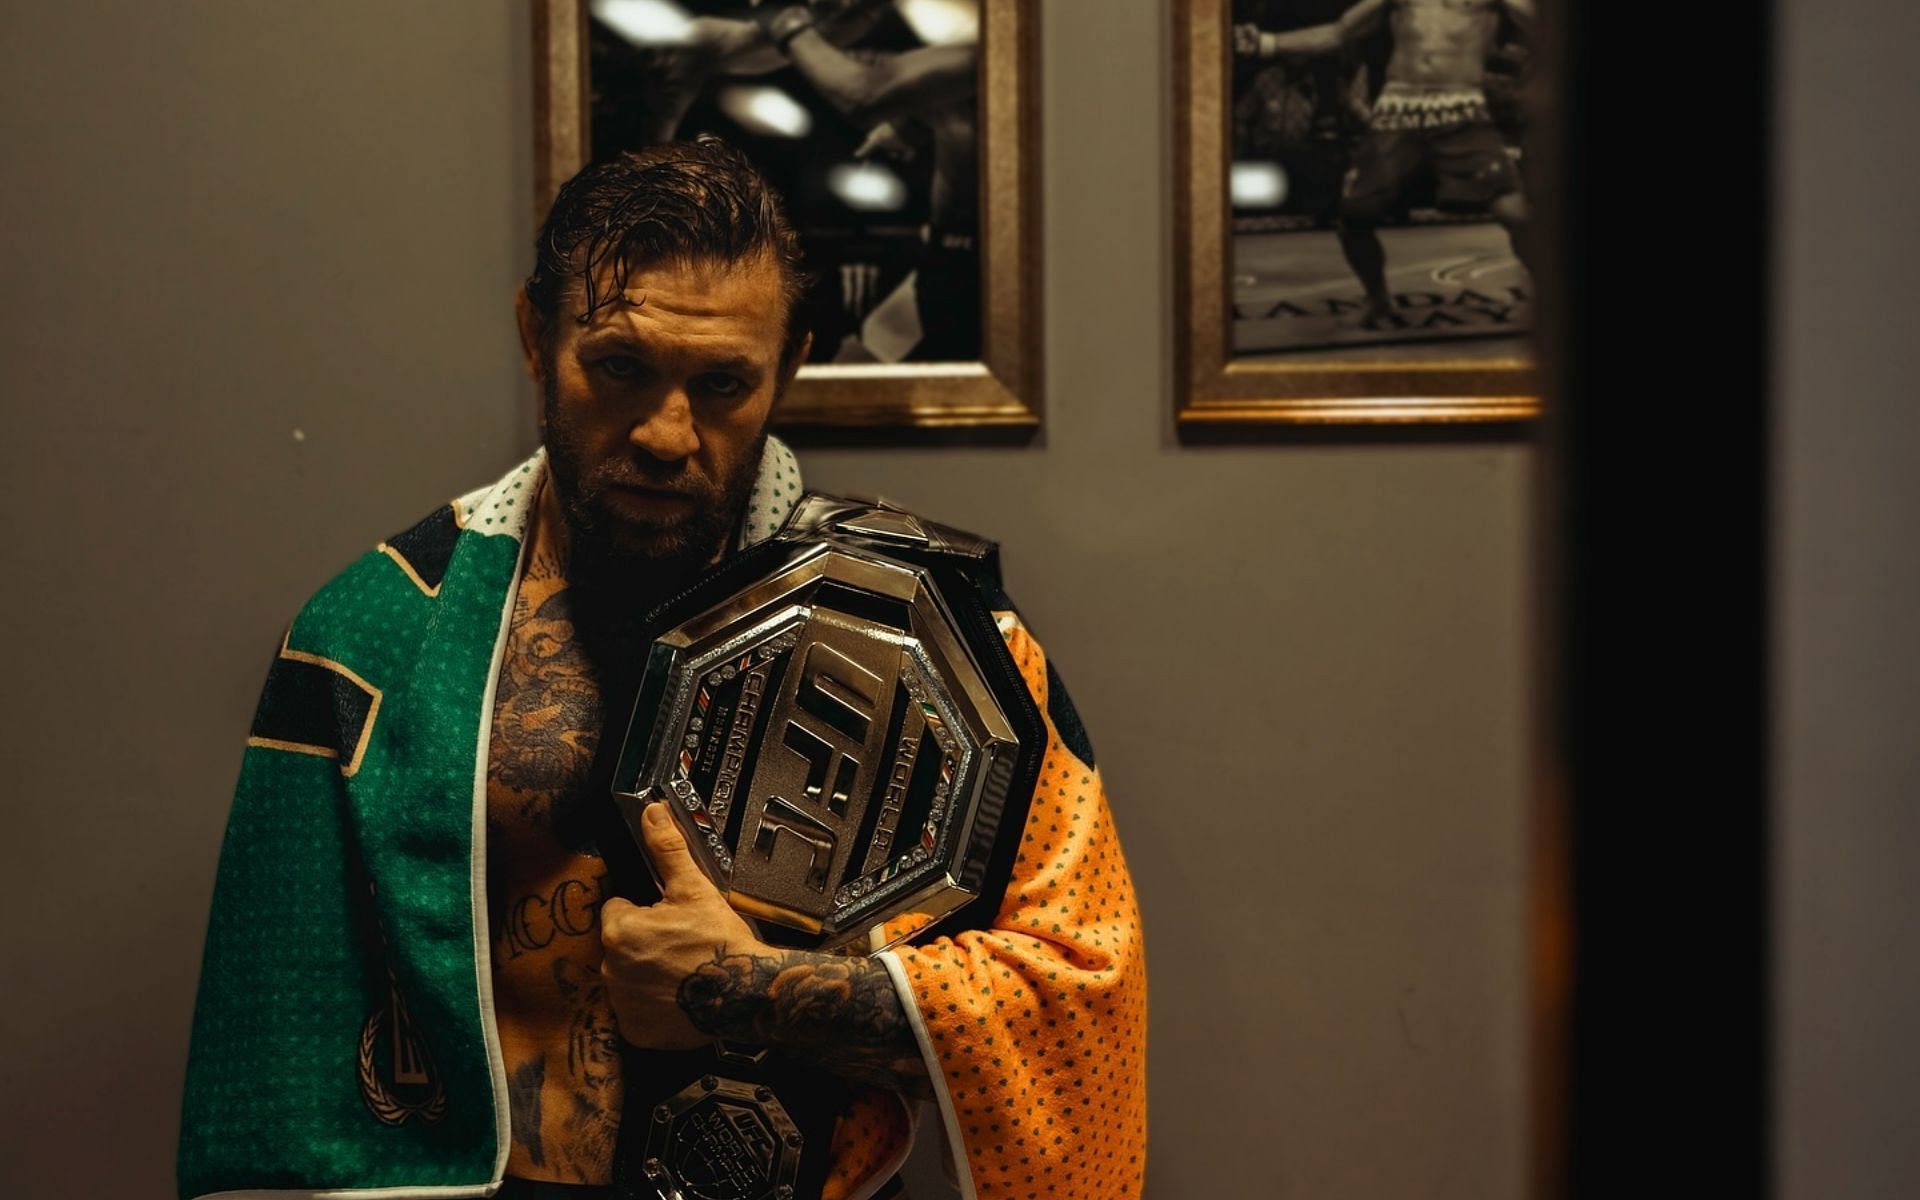 Conor McGregor was stripped of his lightweight title in 2018 [Image Credit: @thenotoriousmma on Instagram]